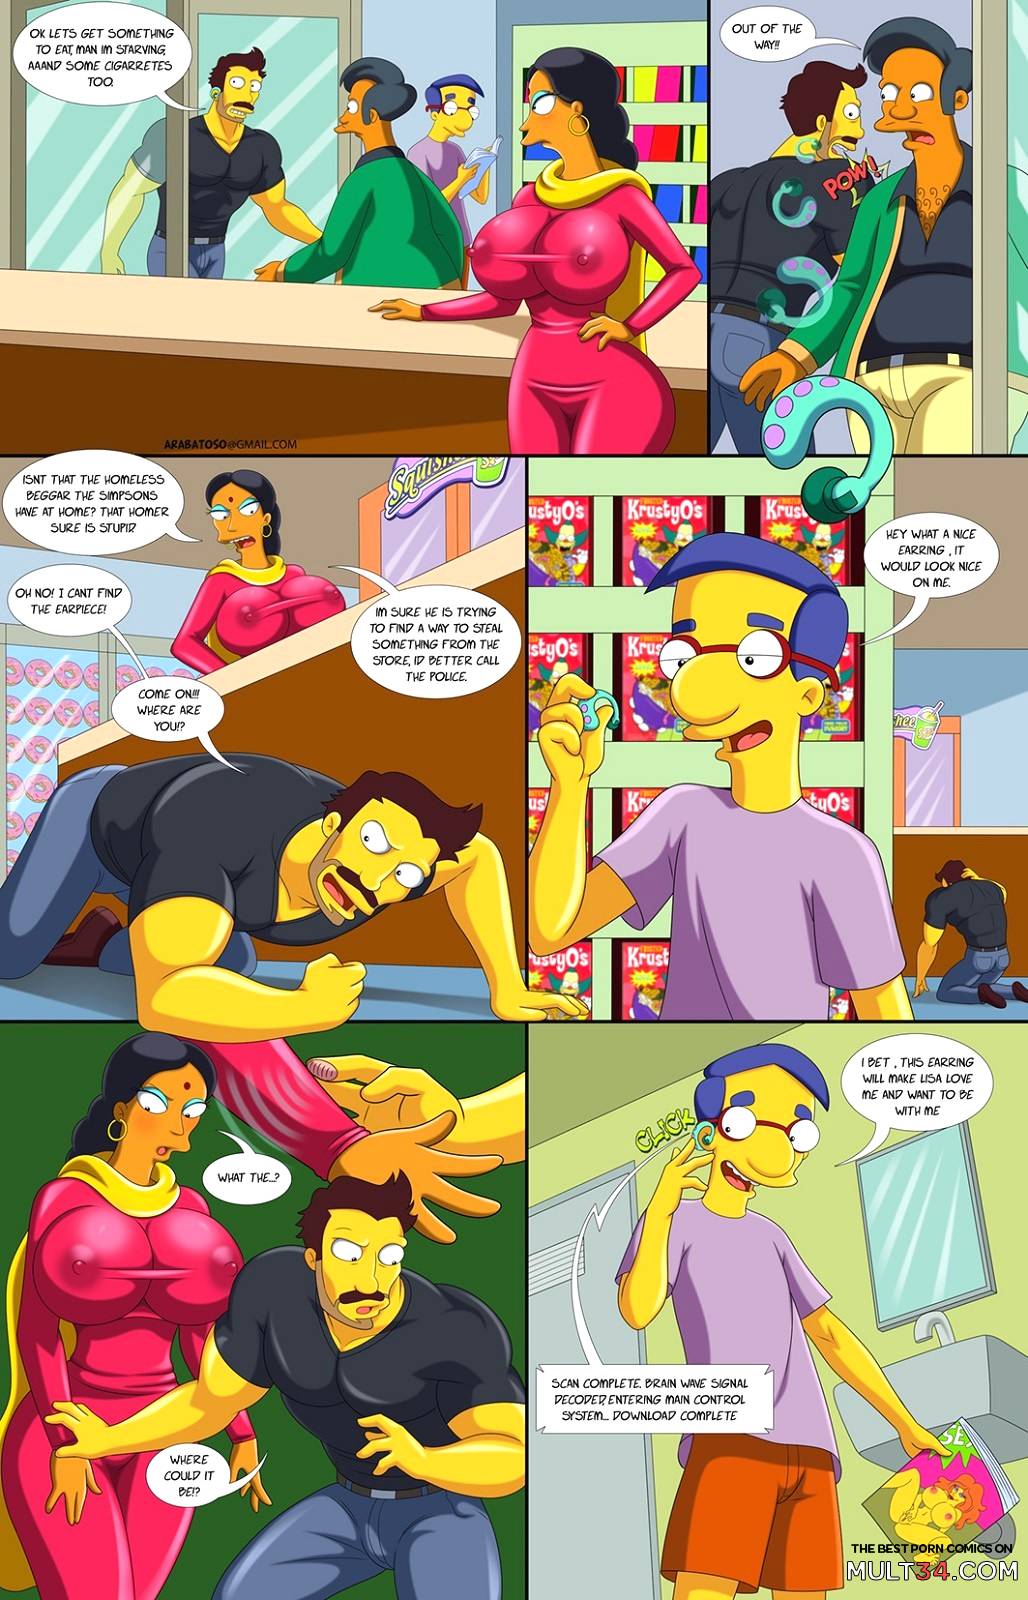 Darren's Adventure or Welcome To Springfield page 14